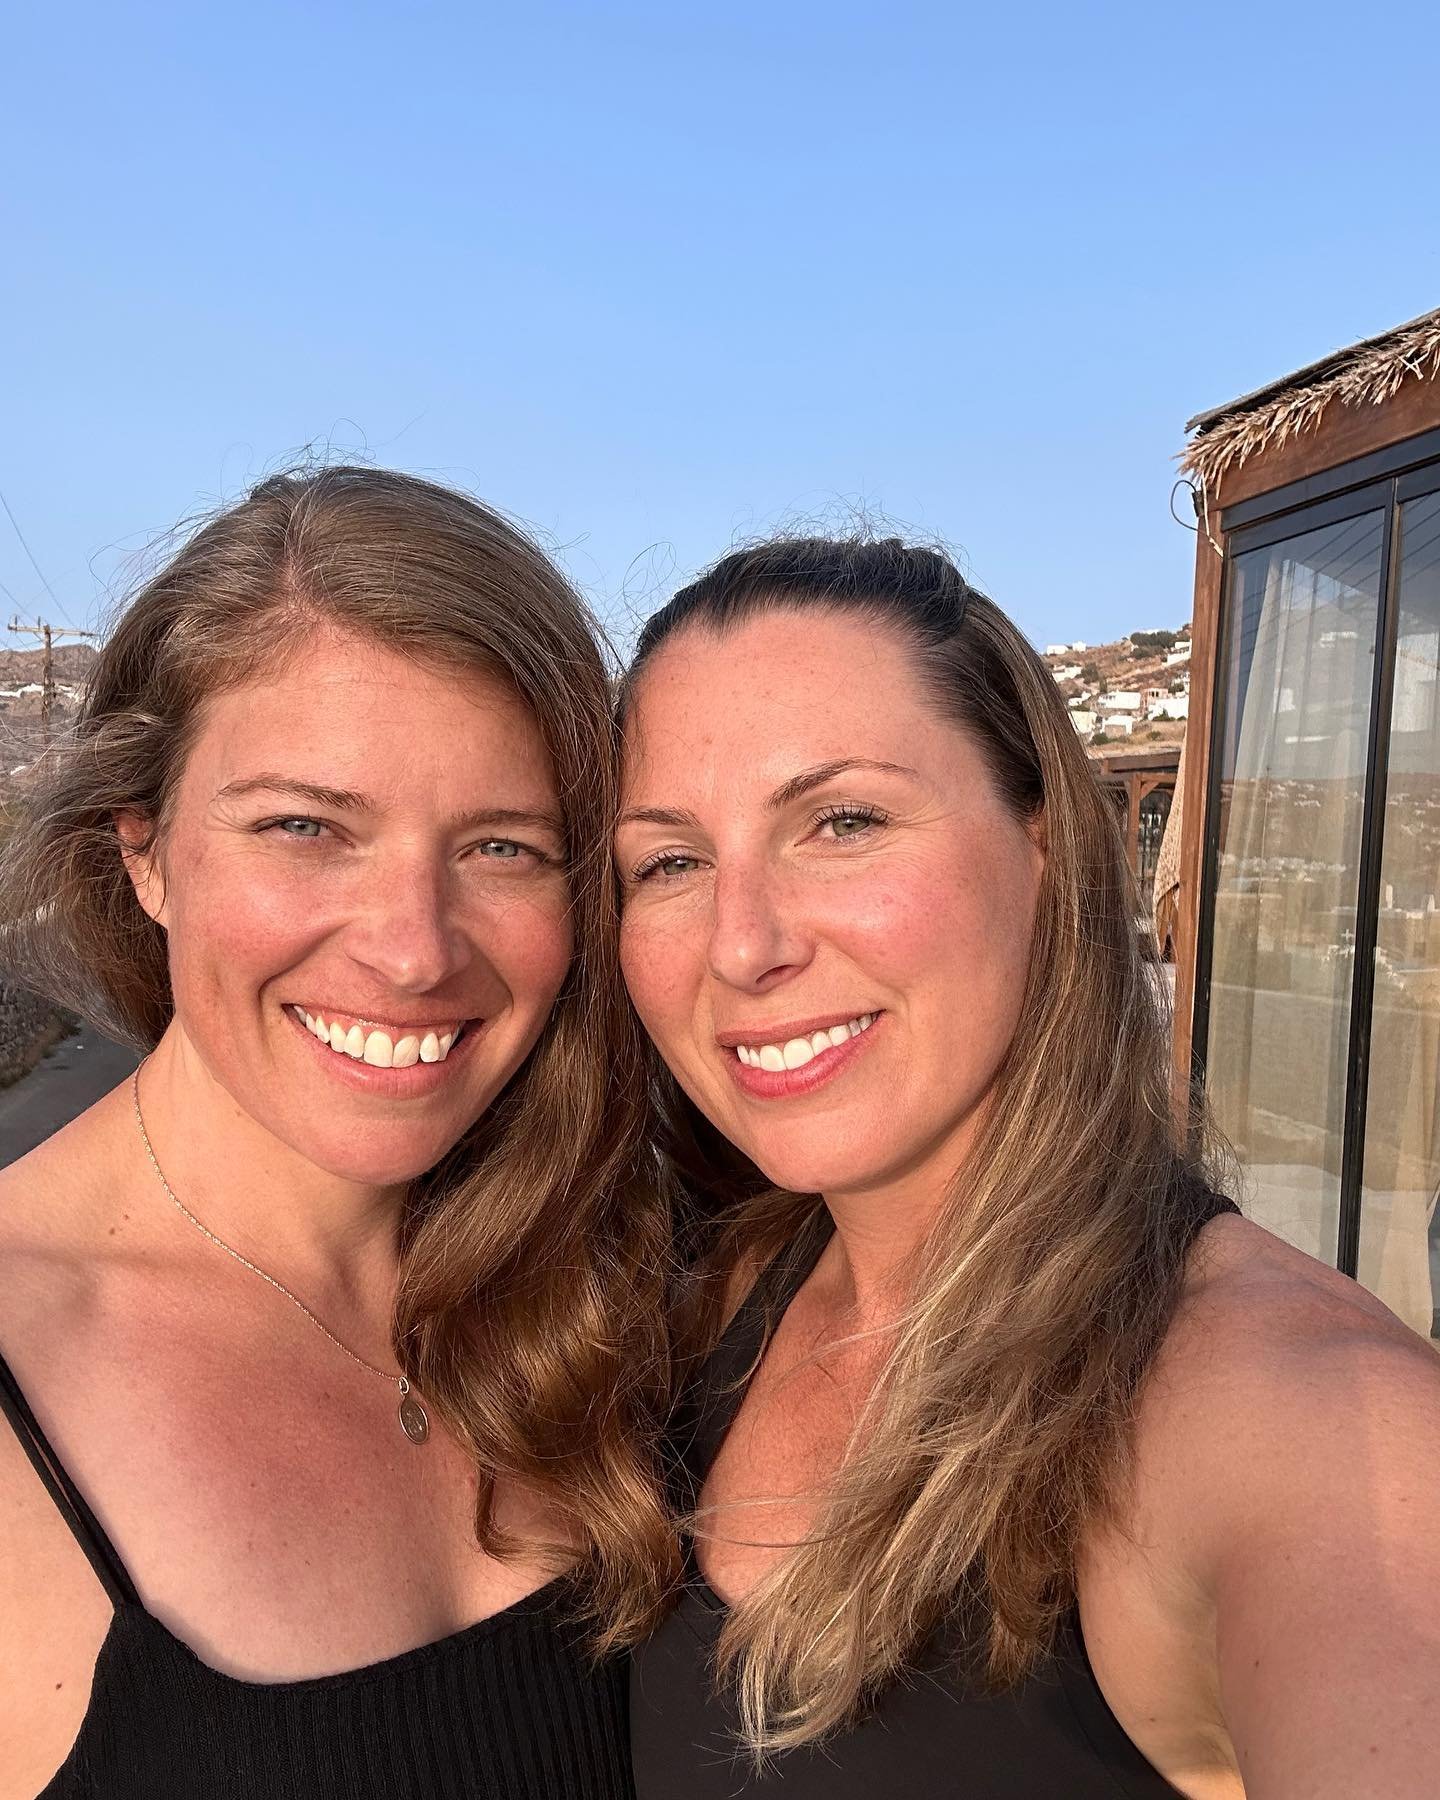 Ash and I met almost 20 years ago while we were both attending the University of Guelph. Spending time together cheerleading at UoG and with Cheer Sport Sharks, our friendship deepened. After graduating we started practicing yoga together. One night 